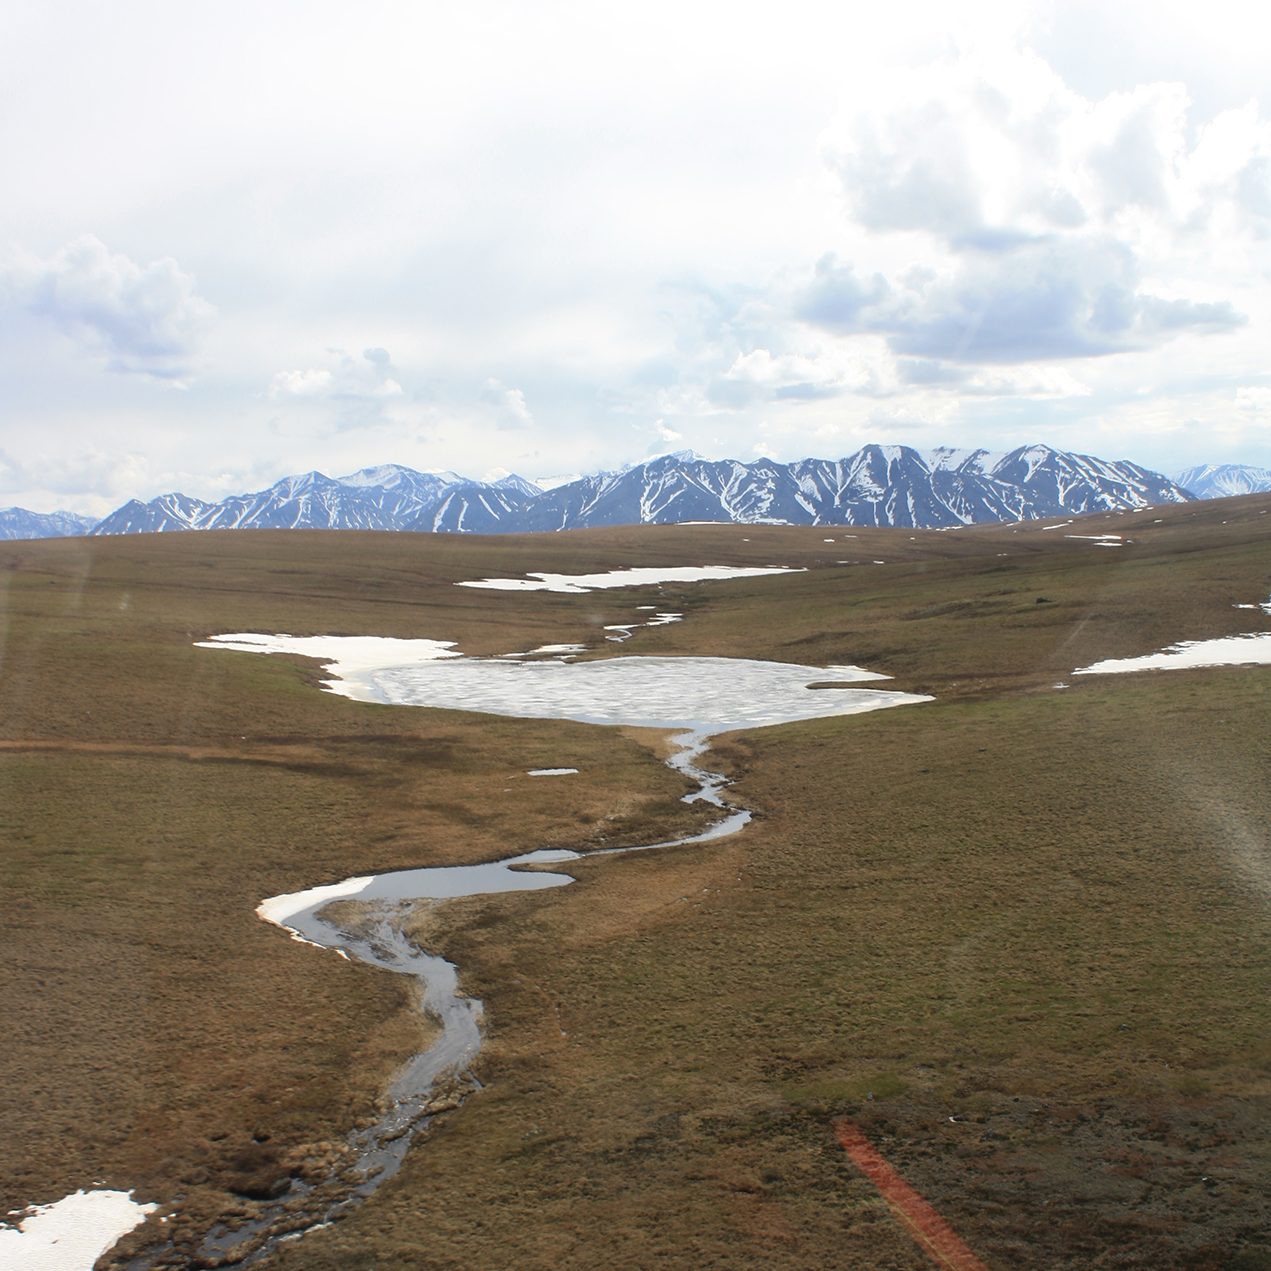 The ice-less scene that greeted researchers in Alaska last spring.